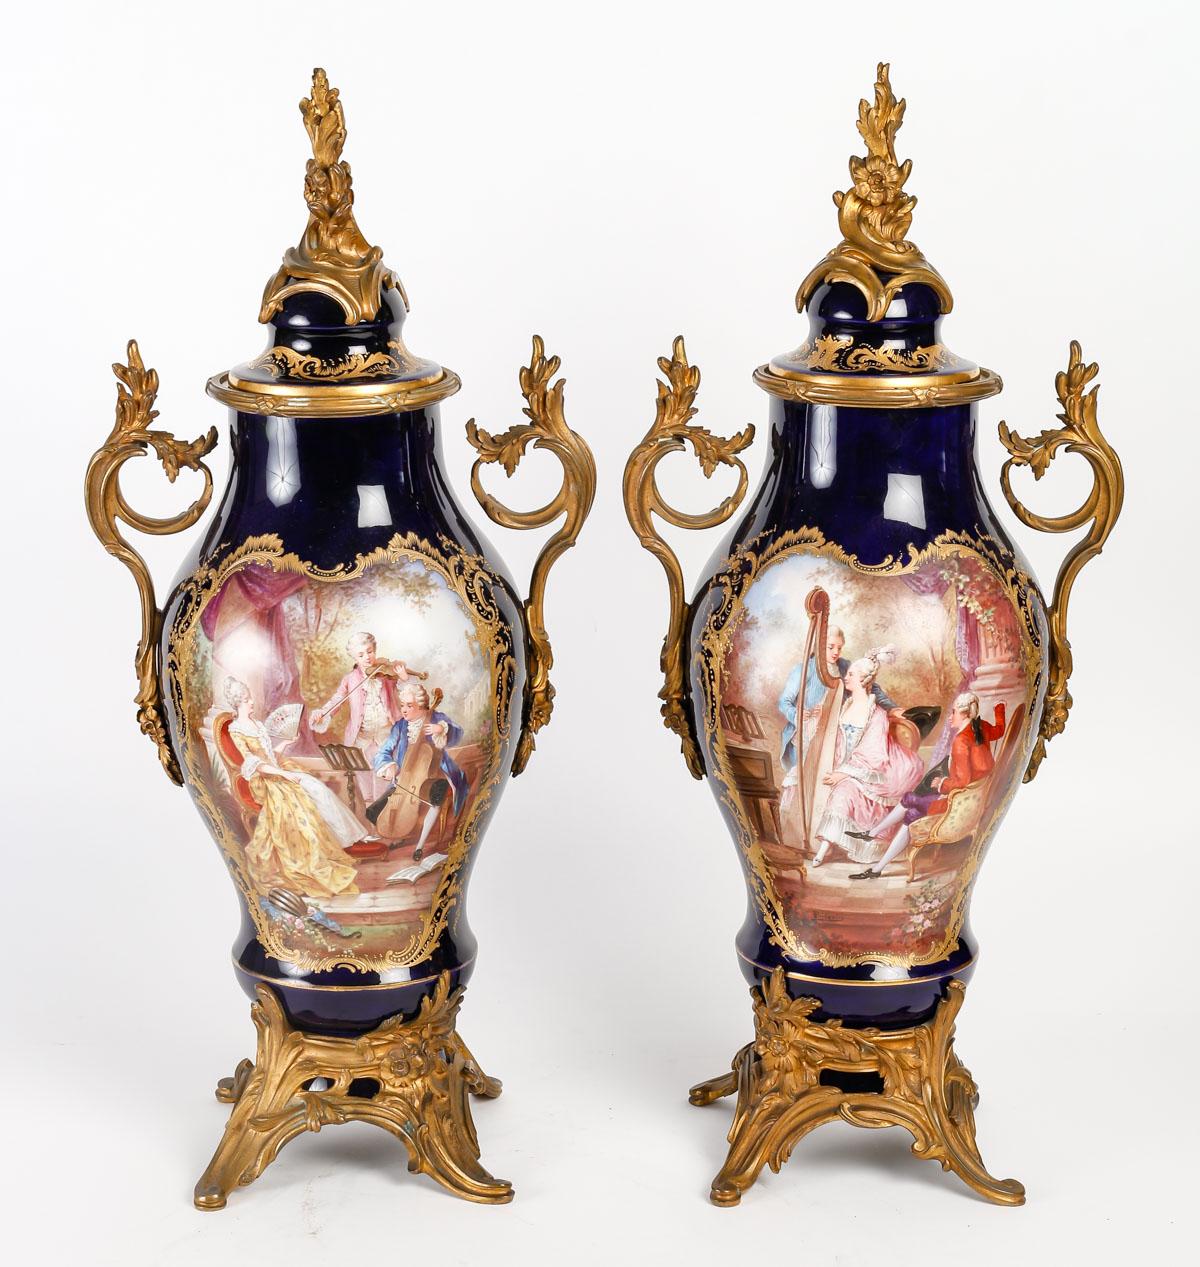 Bronze Rare Pair of Sèvres Porcelain Covered Vases, 19th Century. For Sale